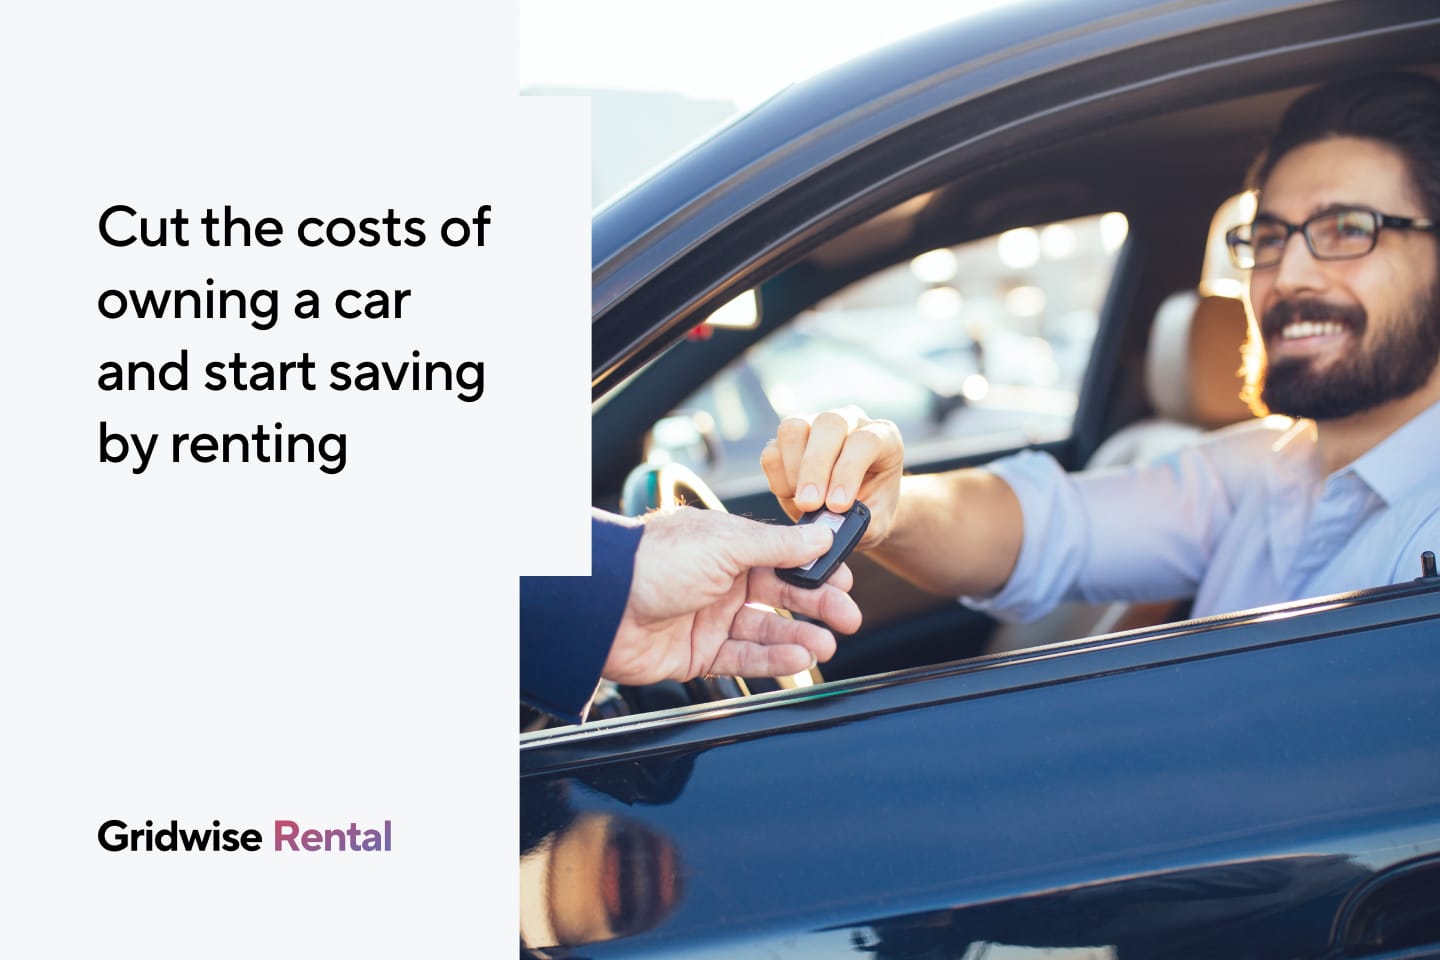 Cut the costs of owning a car and start saving by renting